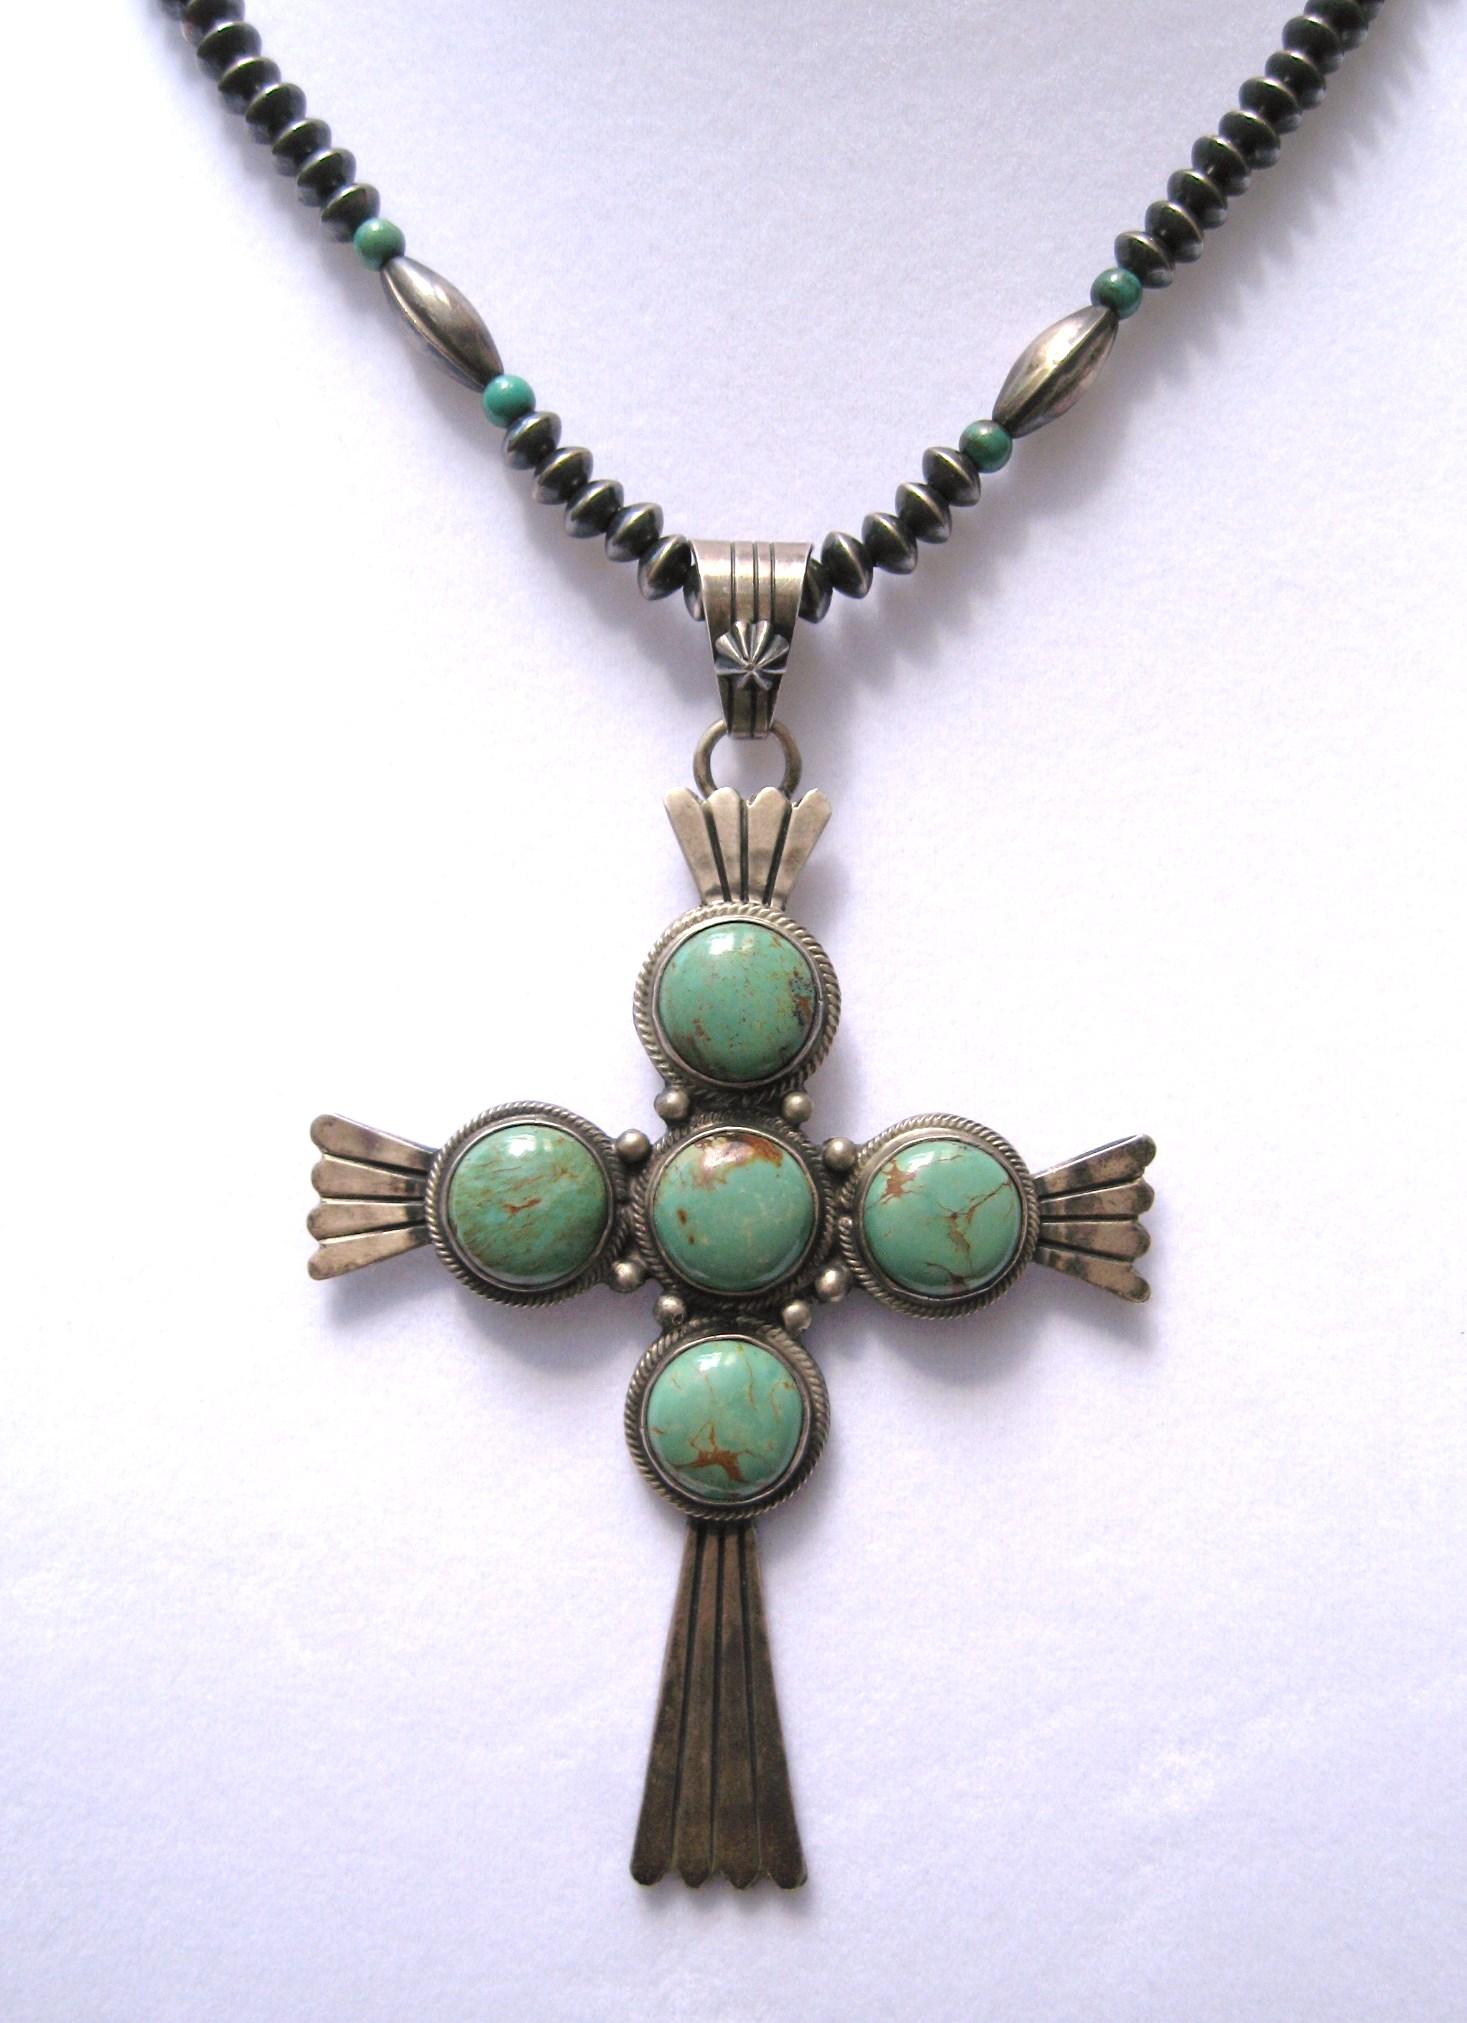 Sterling Silver Navajo Turquoise Cross, large in scale measuring 3.5 inches top to bottom (not including large bale)  x 2.5 inches wide. Chain is beaded with turquoise beading measuring 16.5 inches end to end. Patina as found.  This is out of a